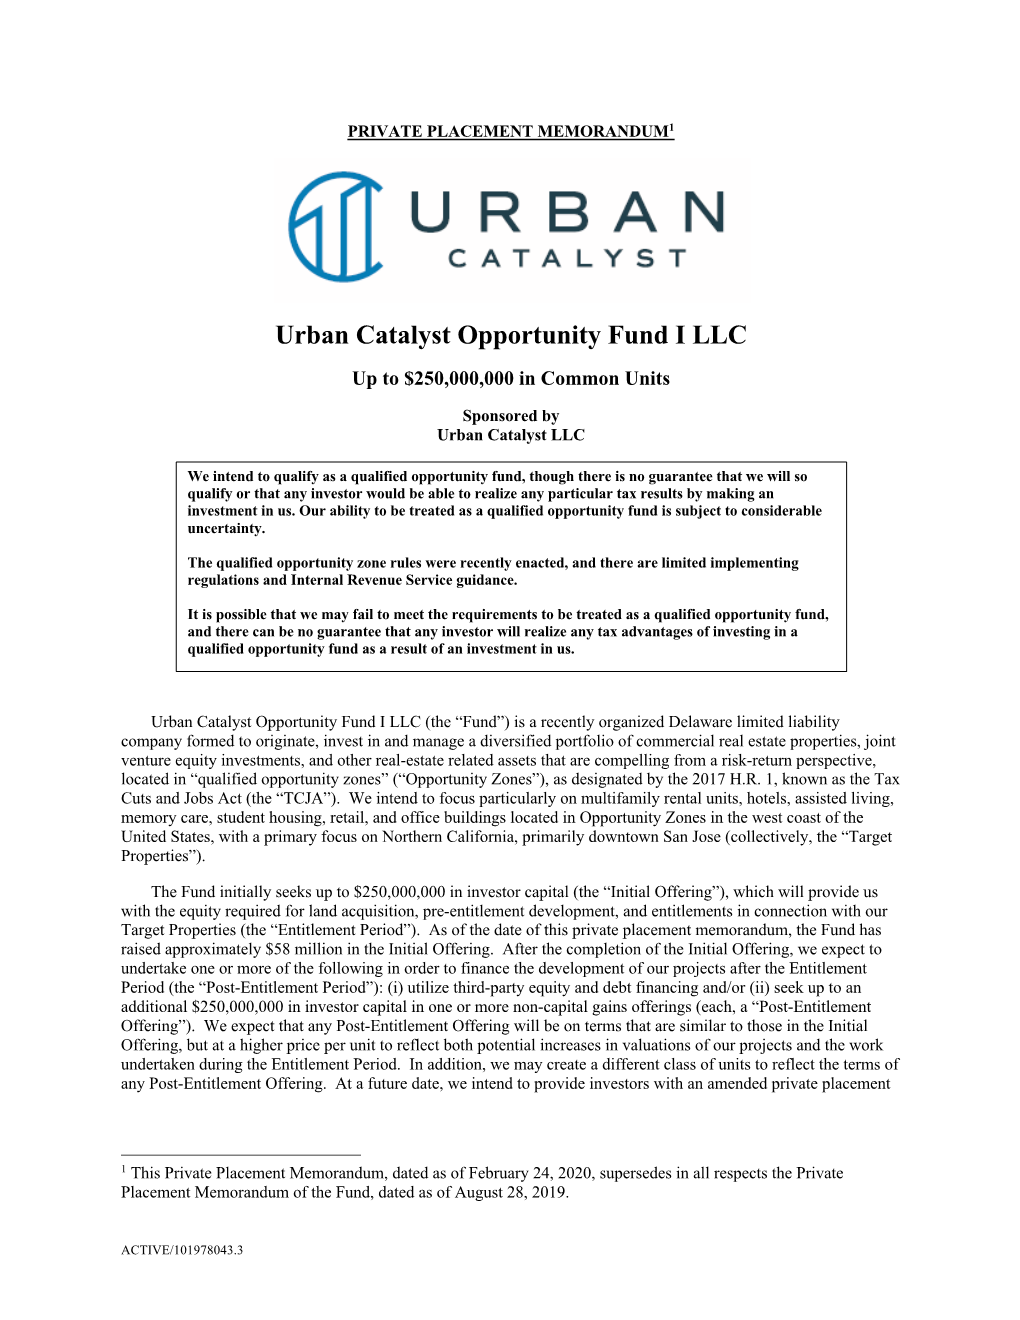 Urban Catalyst Opportunity Fund I LLC up to $250,000,000 in Common Units